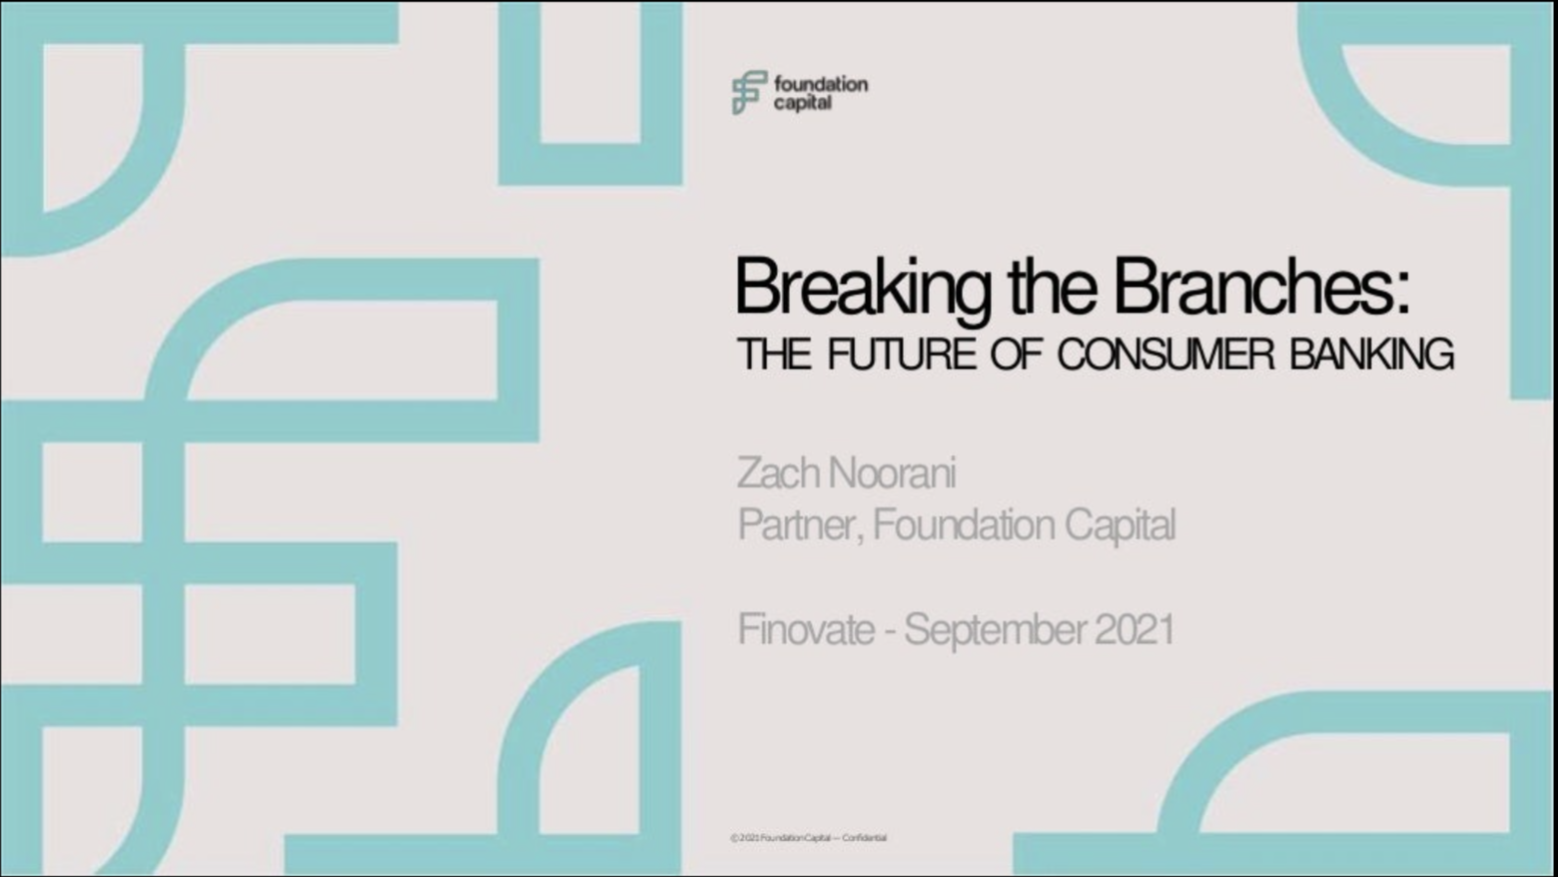 Breaking the Branches: The Future of Consumer Banking with Zach Noorani, Partner at Foundation Capital. Finovate event, september 2021